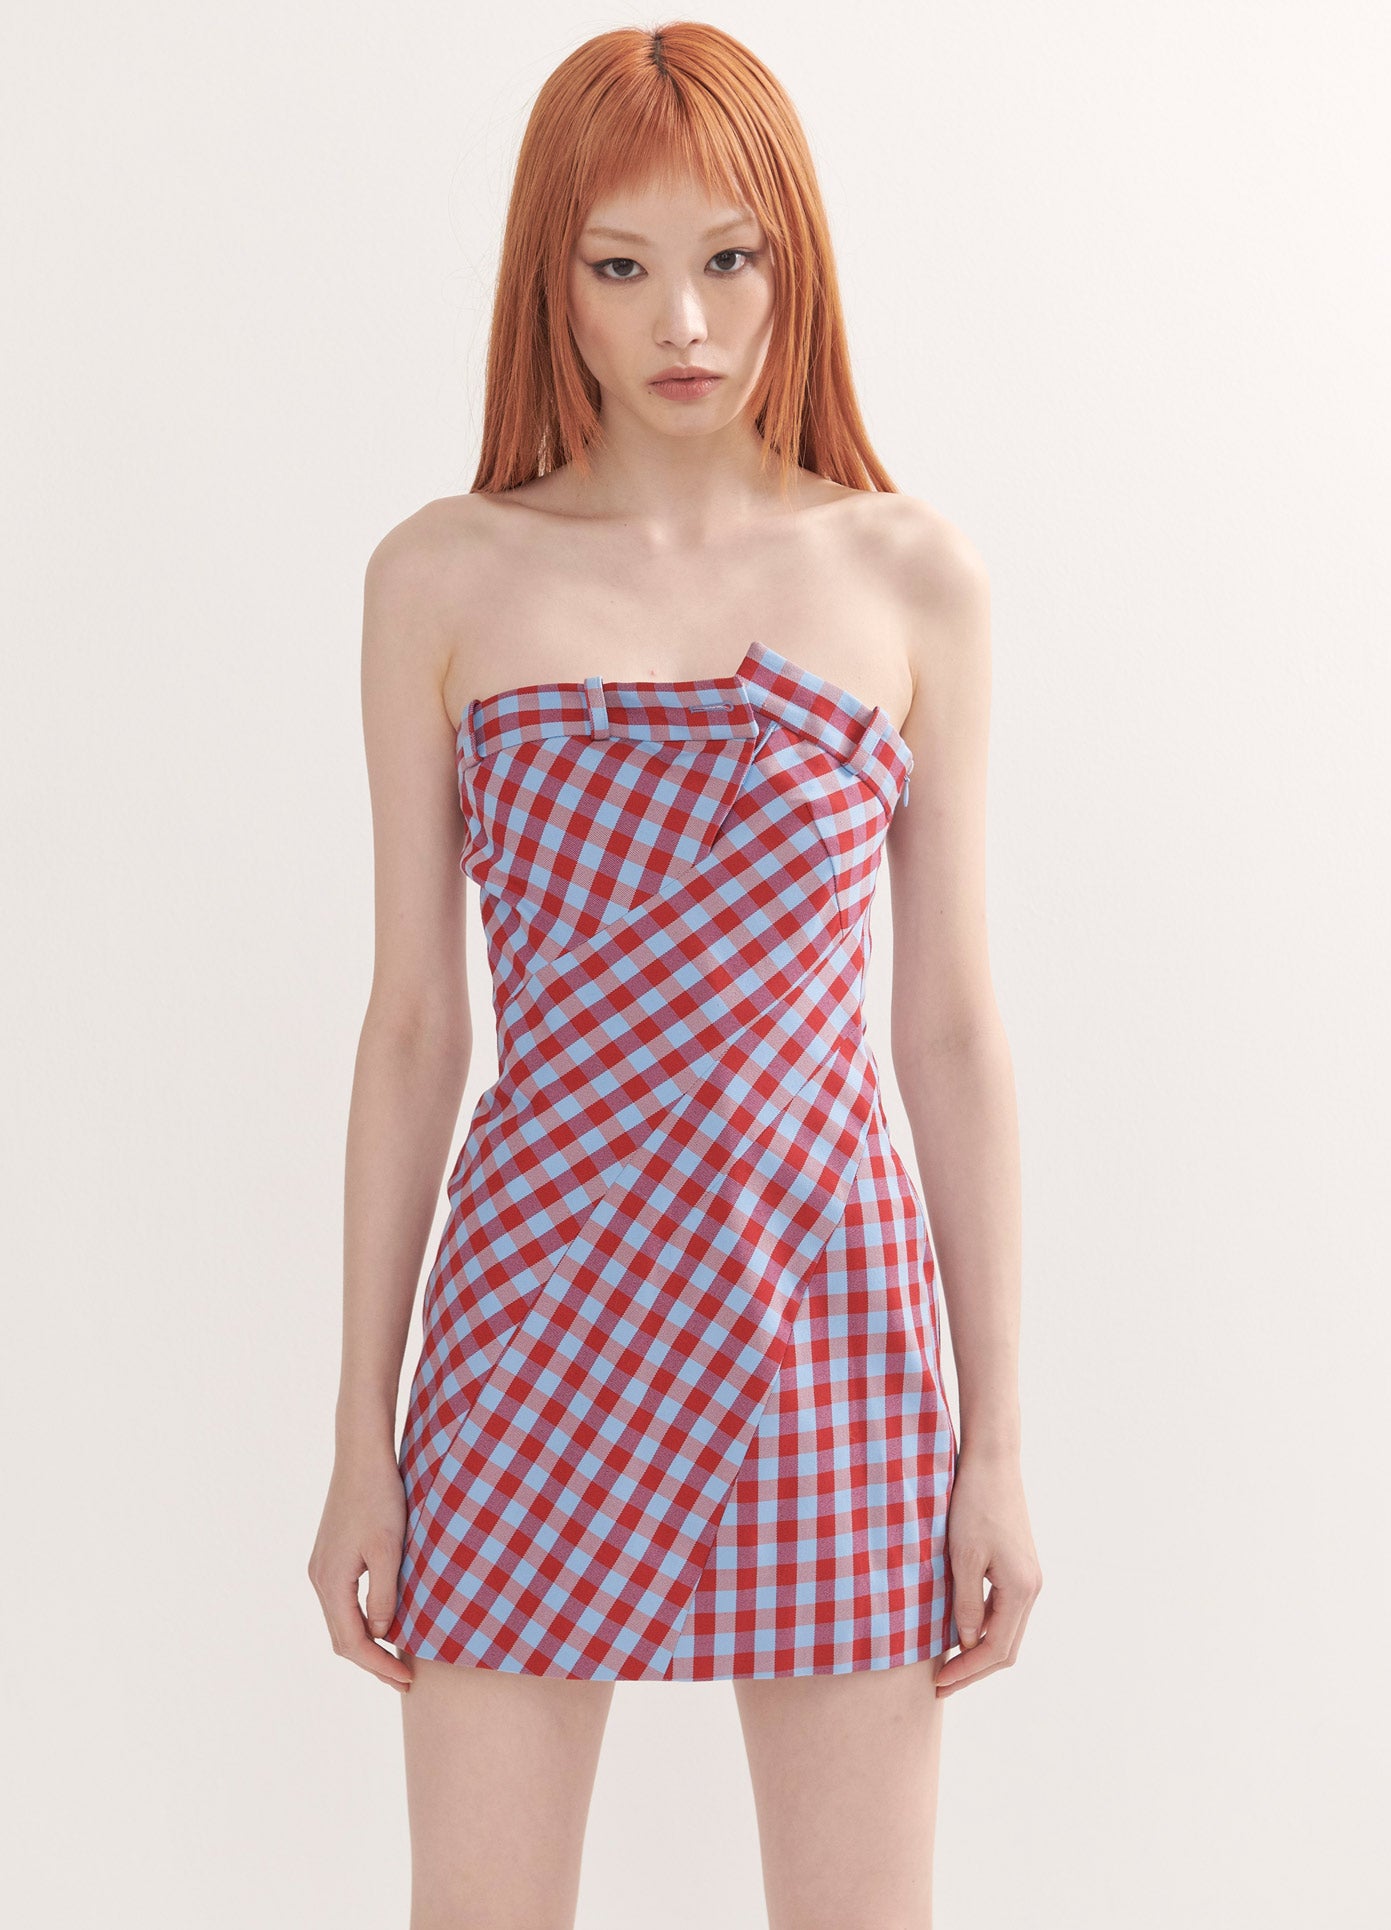 MONSE Check Strapless Twisted Dress in Ruby and Blue on Model Front View